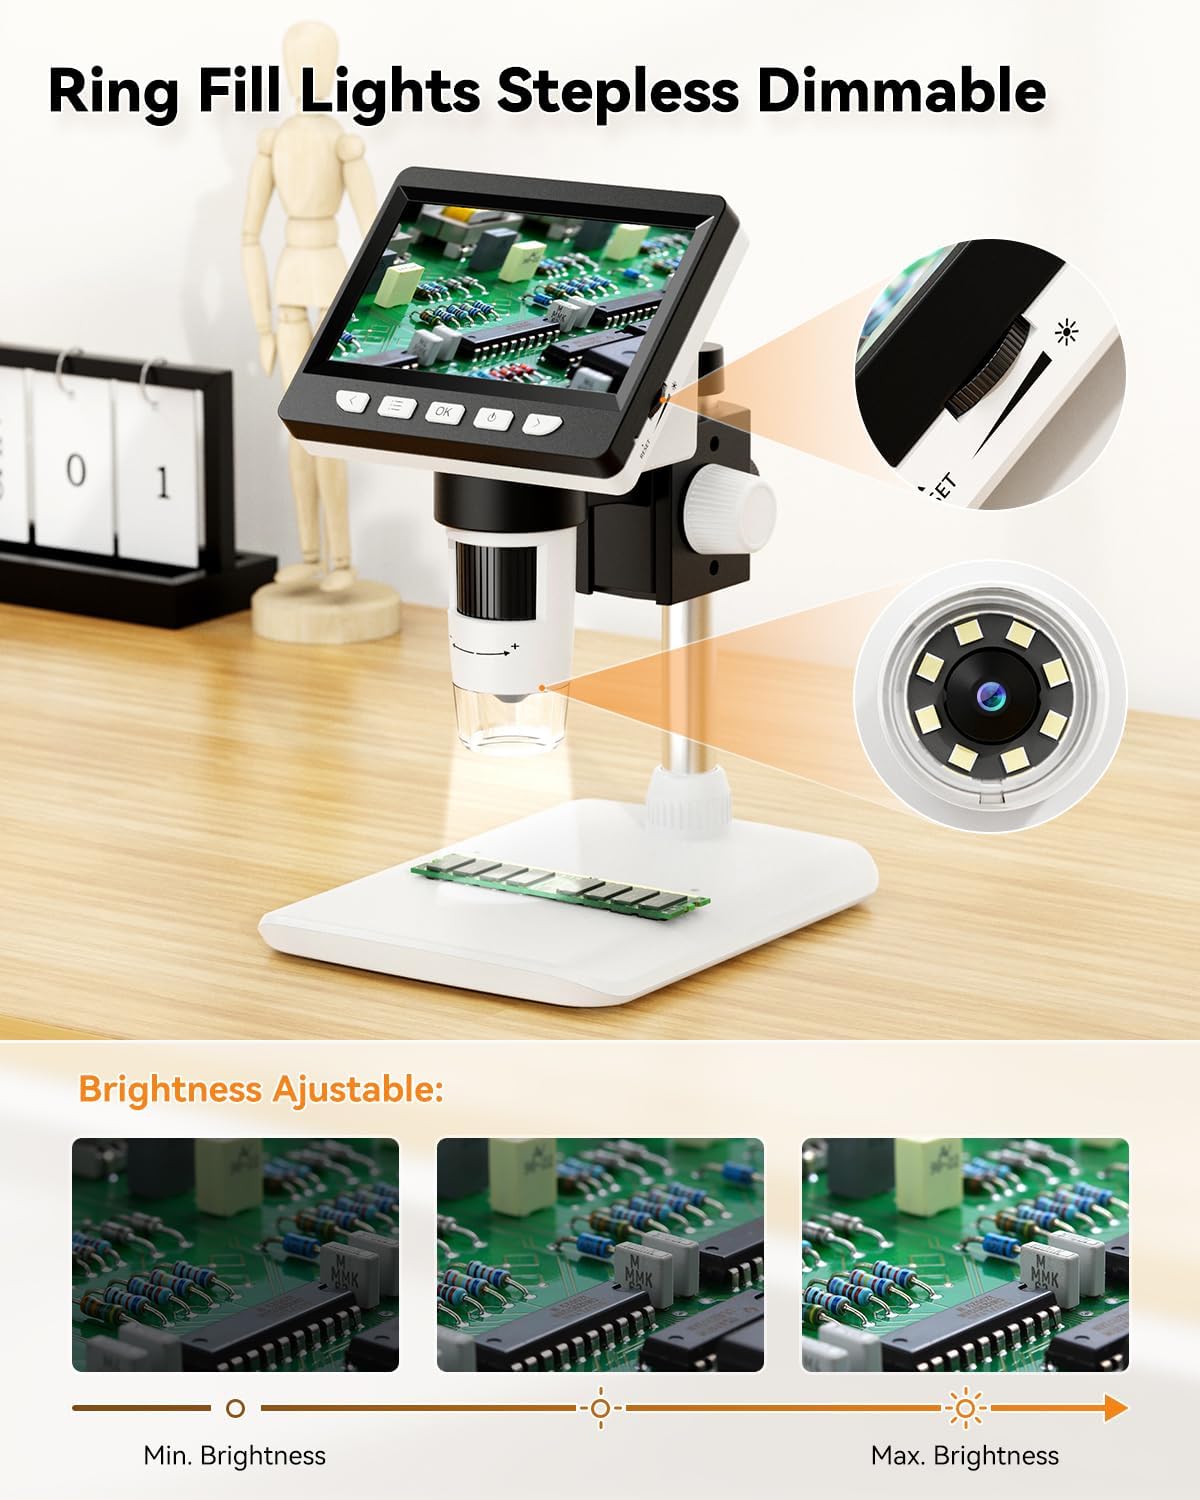 4.3" Digital Microscope for Adults, SKYEAR Coin Microscope1000X Magnification with 8 Ajustable LED Fill Lights, USB Microscope for Windows/MacOS, Coin Collection Supplies